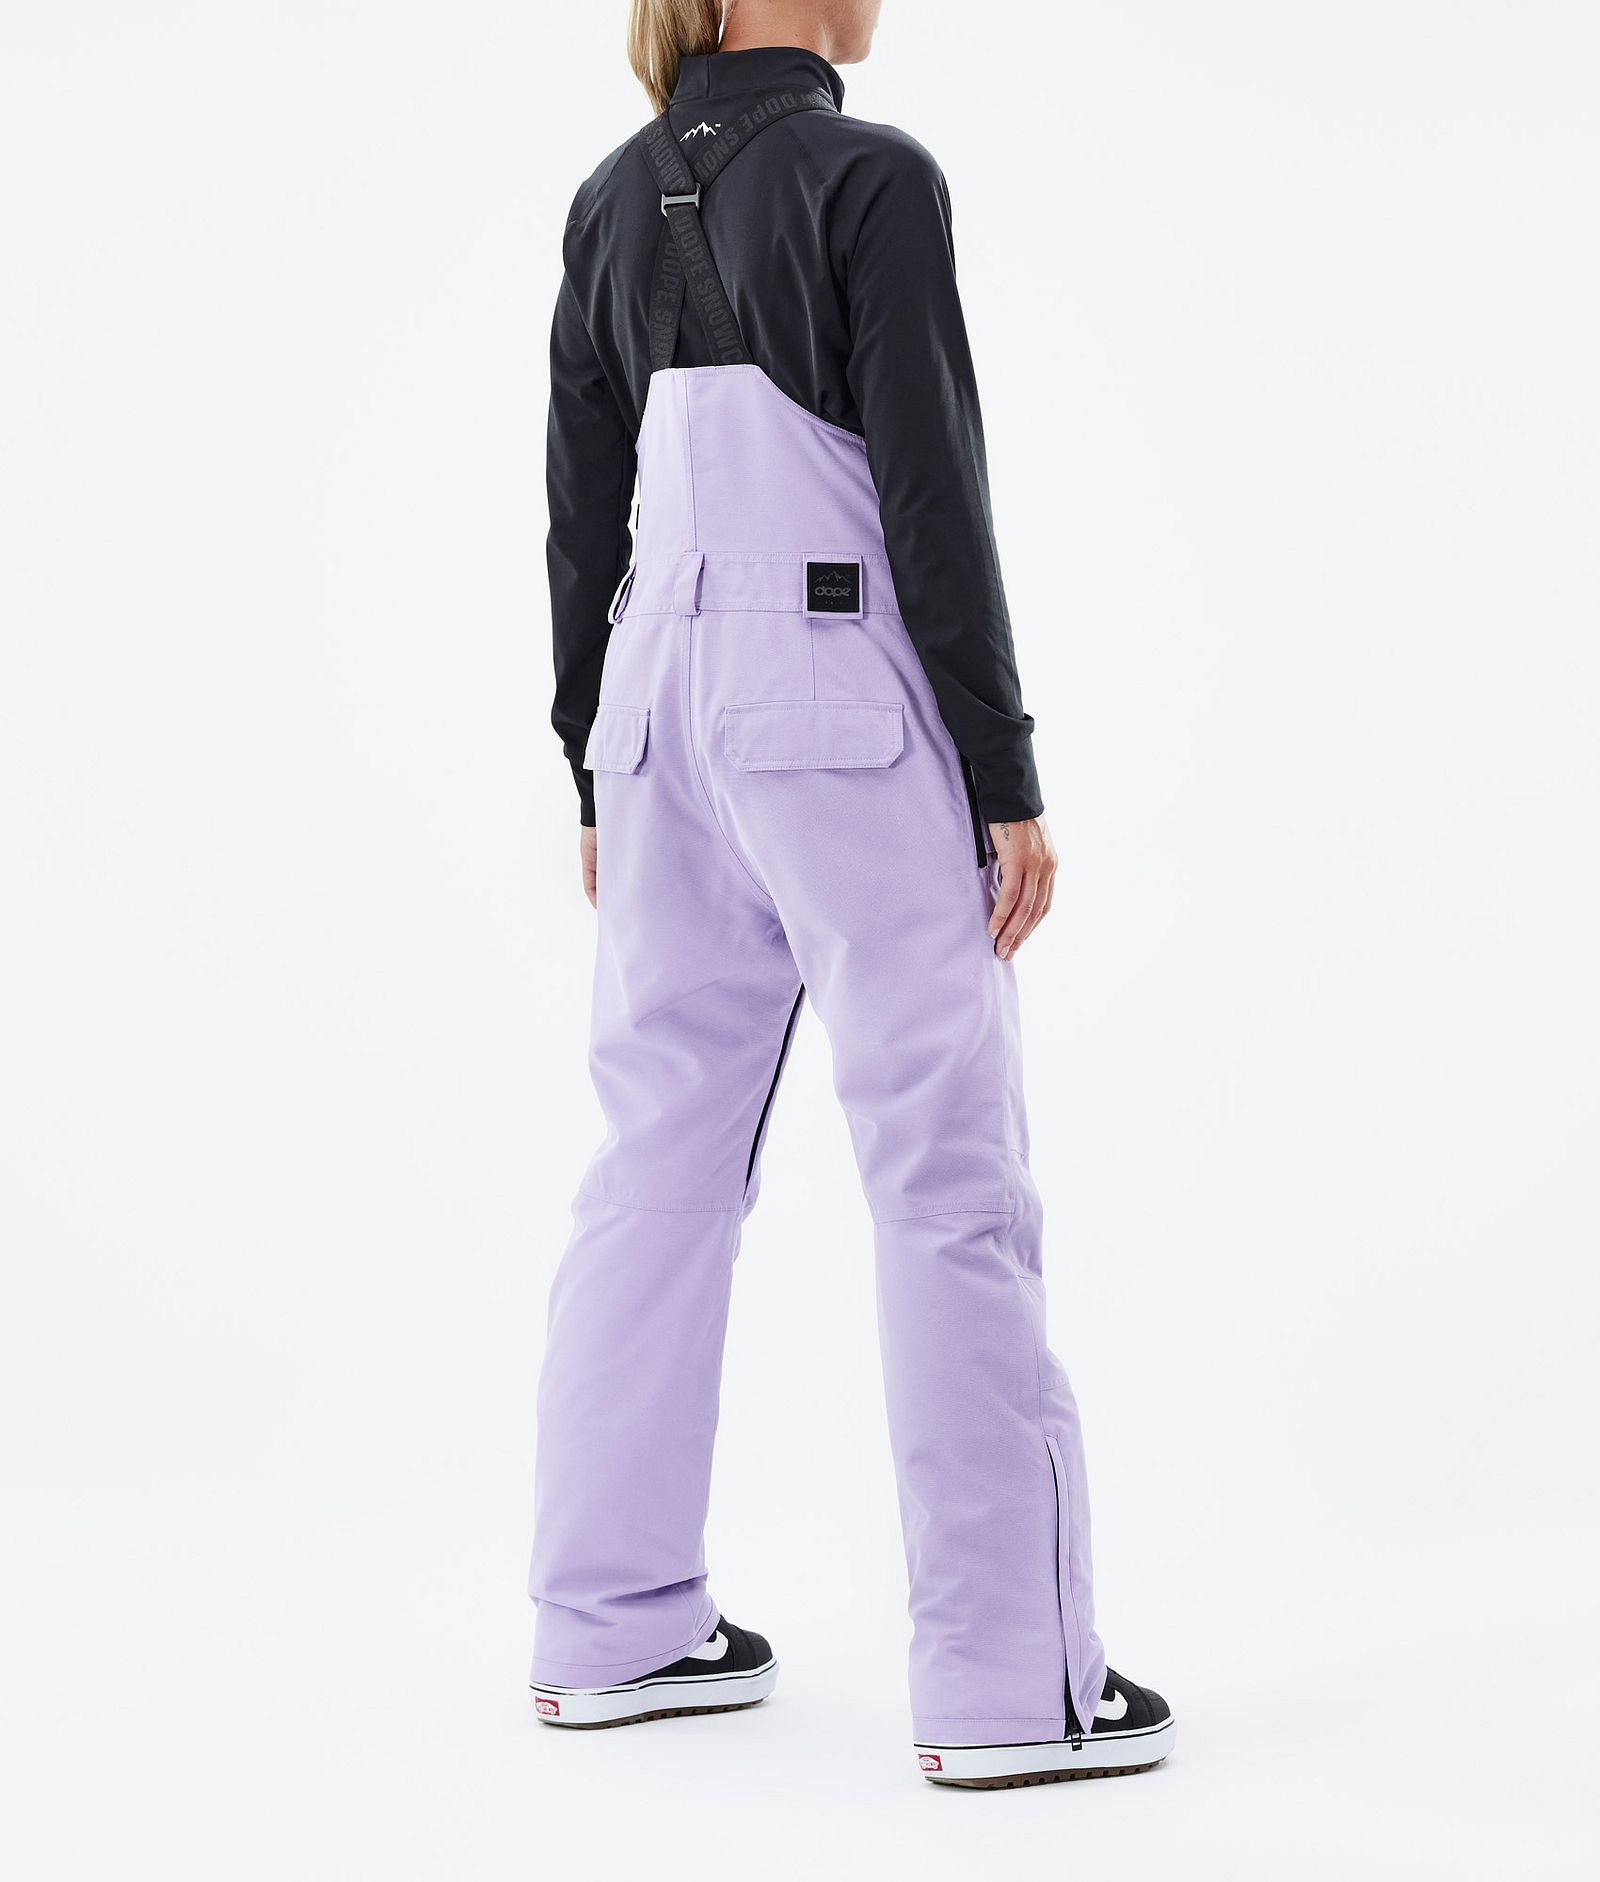 Notorious B.I.B W 2022 Snowboard Pants Women Faded Violet, Image 3 of 6